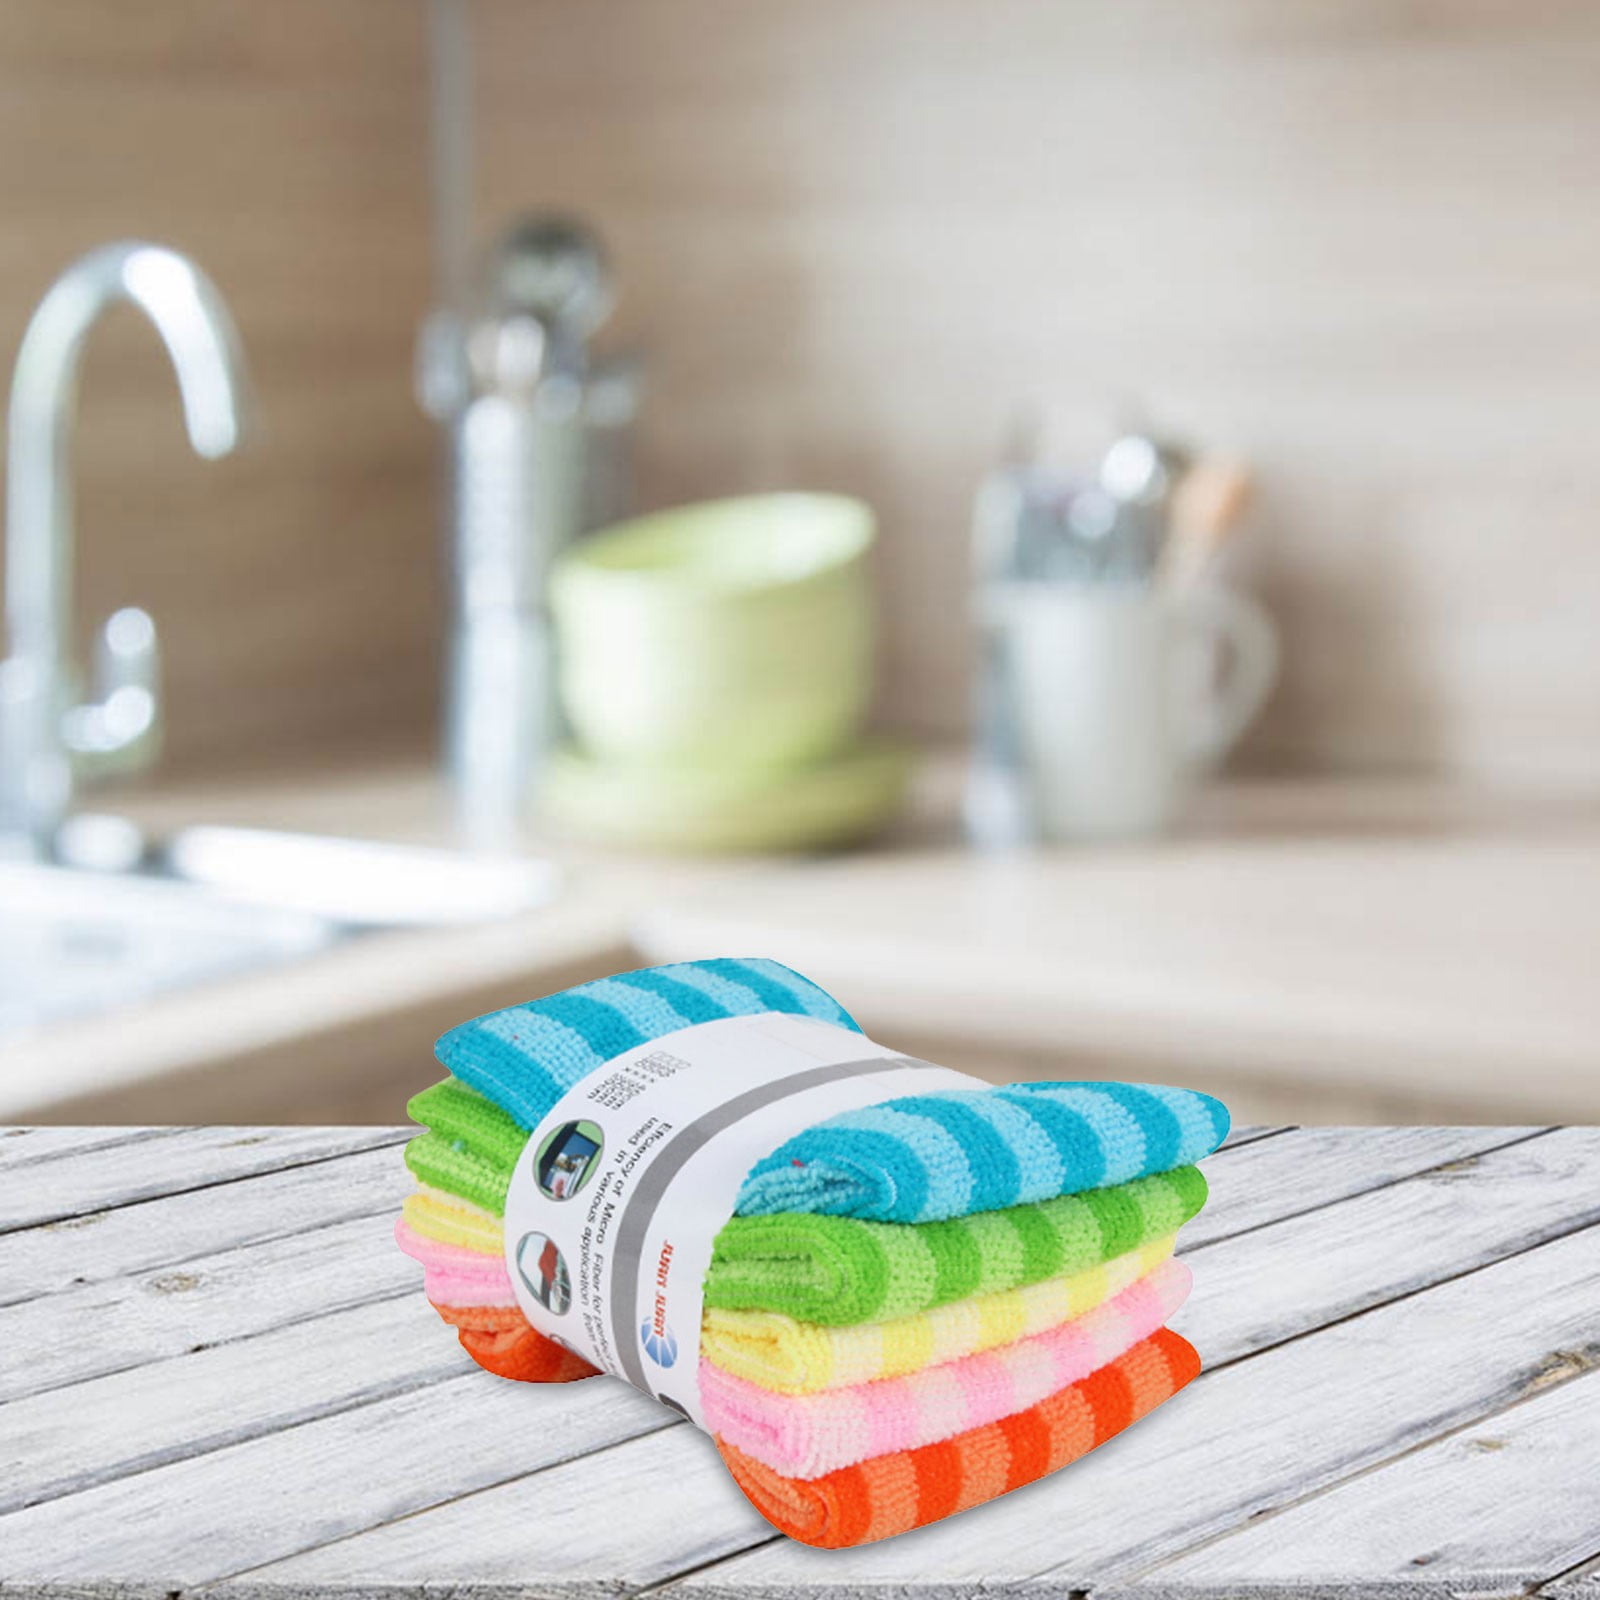 Kitchen Towel Best Reusable Cleaning Cloths Nonstick Oil Coral Velvet Hanging  Hand Towels Dishclout Washing Windows Car Floor Home Clean #15 From  Kerykiss, $1.52